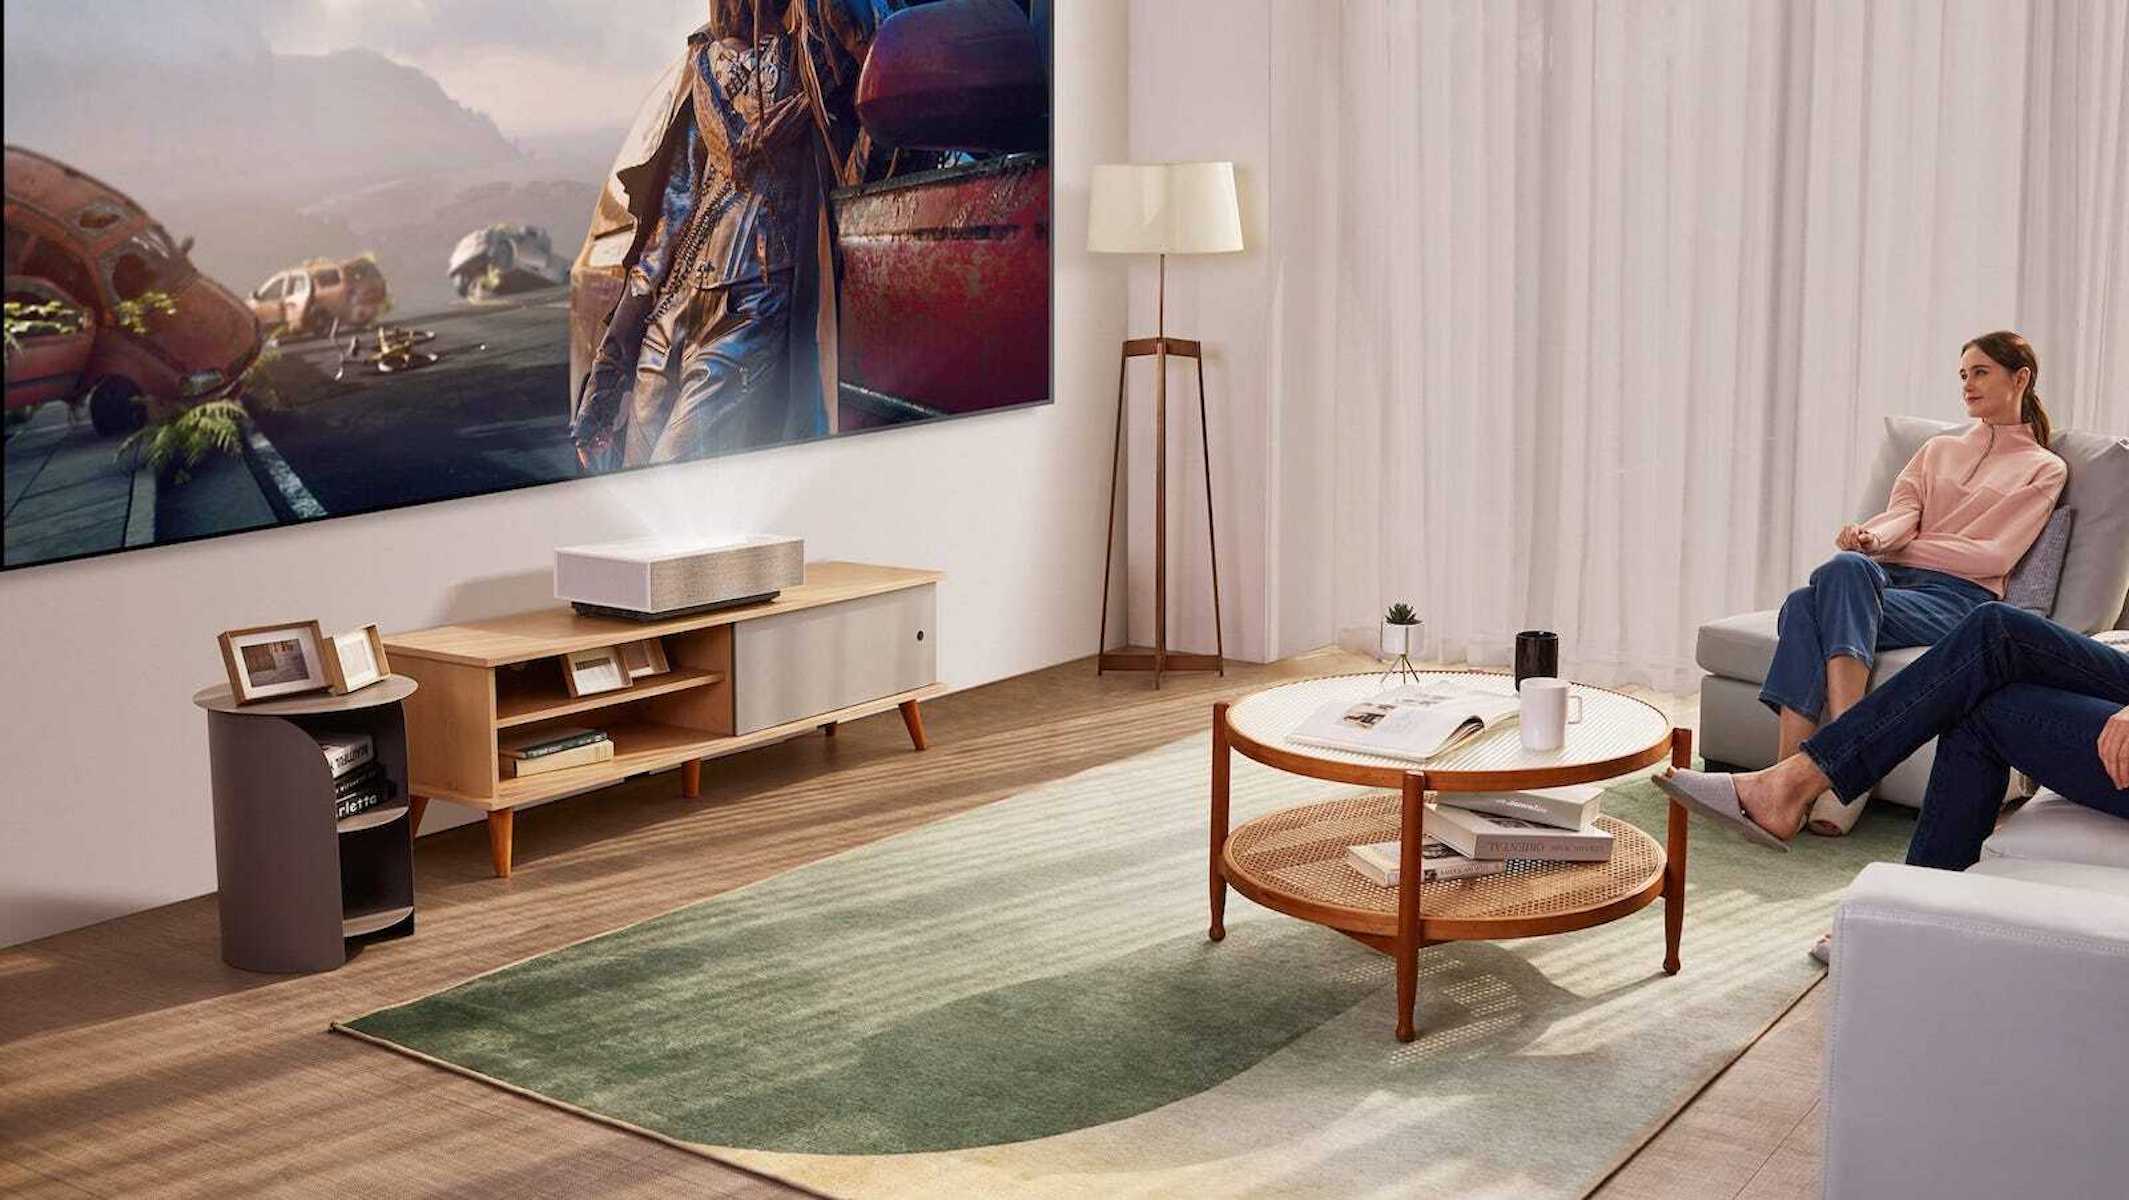 https://thegadgetflow.com/wp-content/uploads/2022/04/Which-smart-projector-will-best-serve-your-living-room-in-2022-blog-featured.jpeg